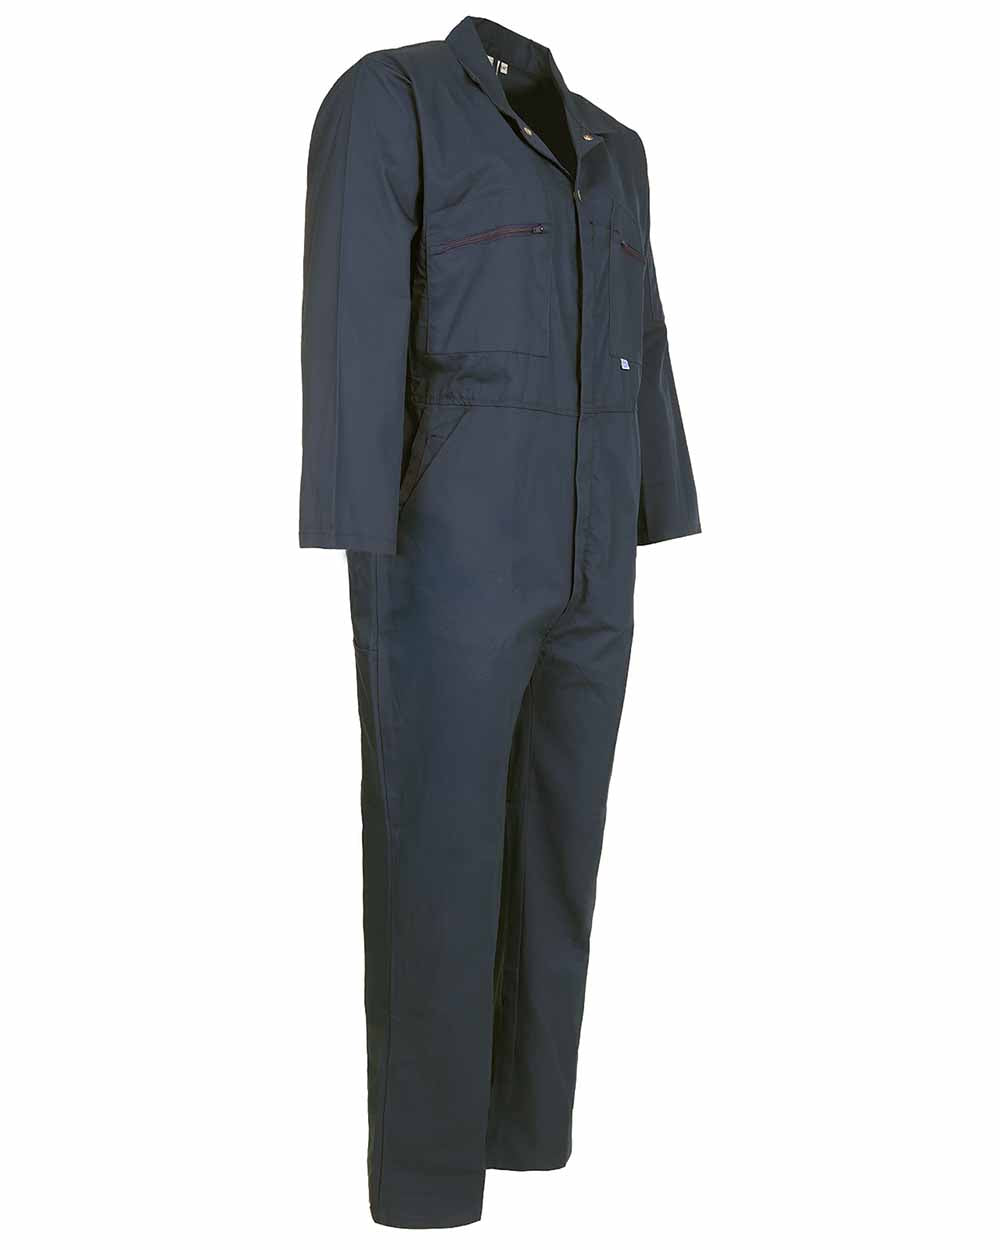 Chest pocket with zip detail on Fort Zip Front Boilersuit in Spruce 